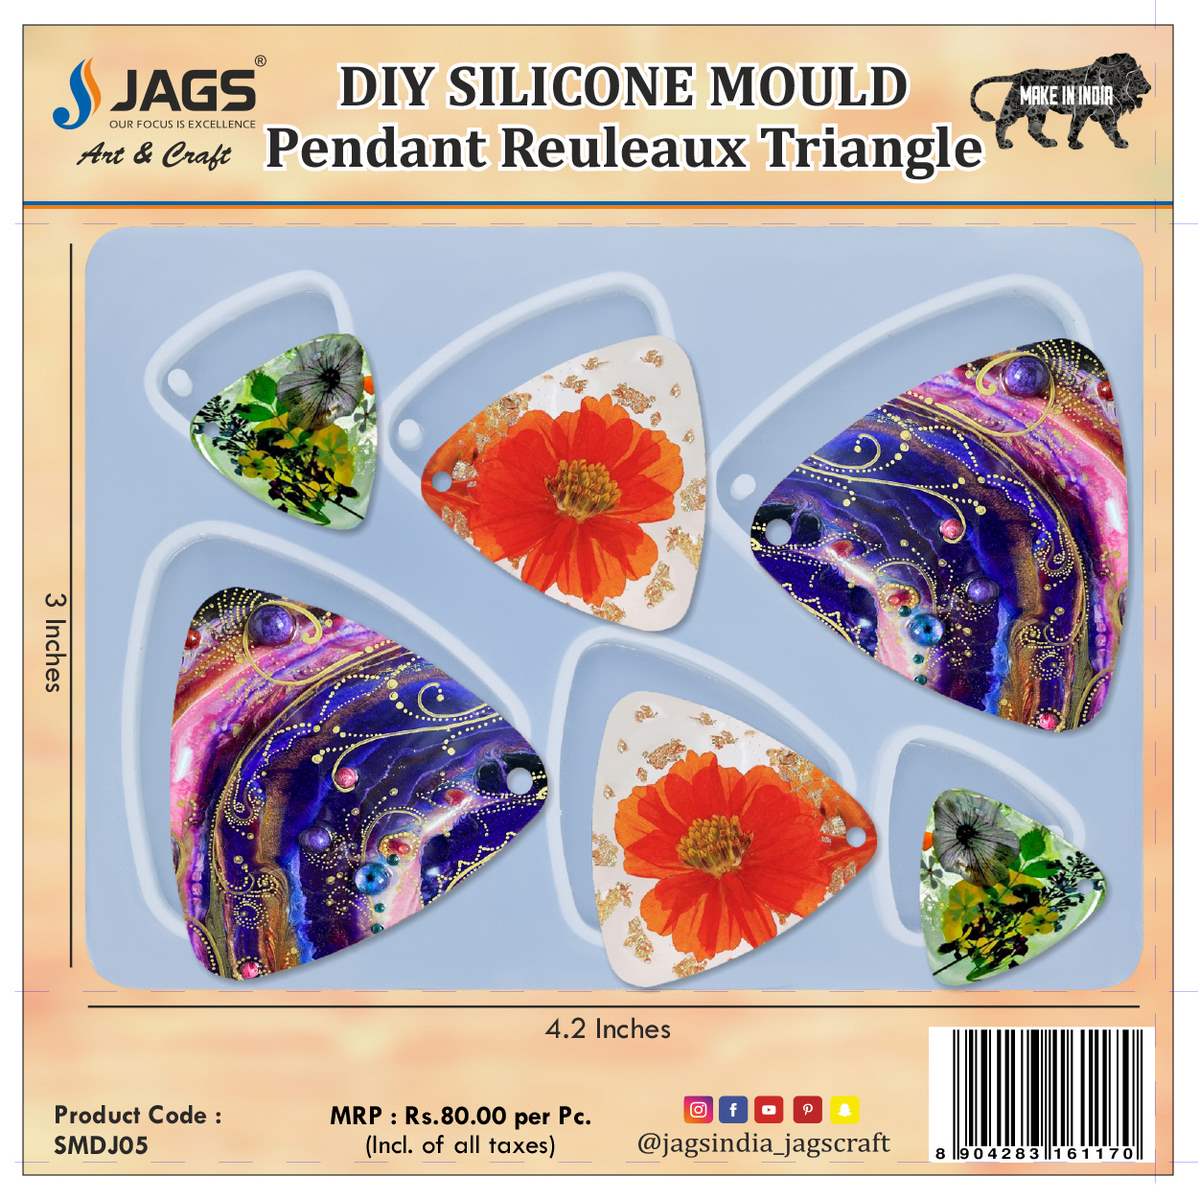 jags-mumbai Mould Silicone Mould Diy Jewelry Pendant Reuleaux Triangle SMDJ05